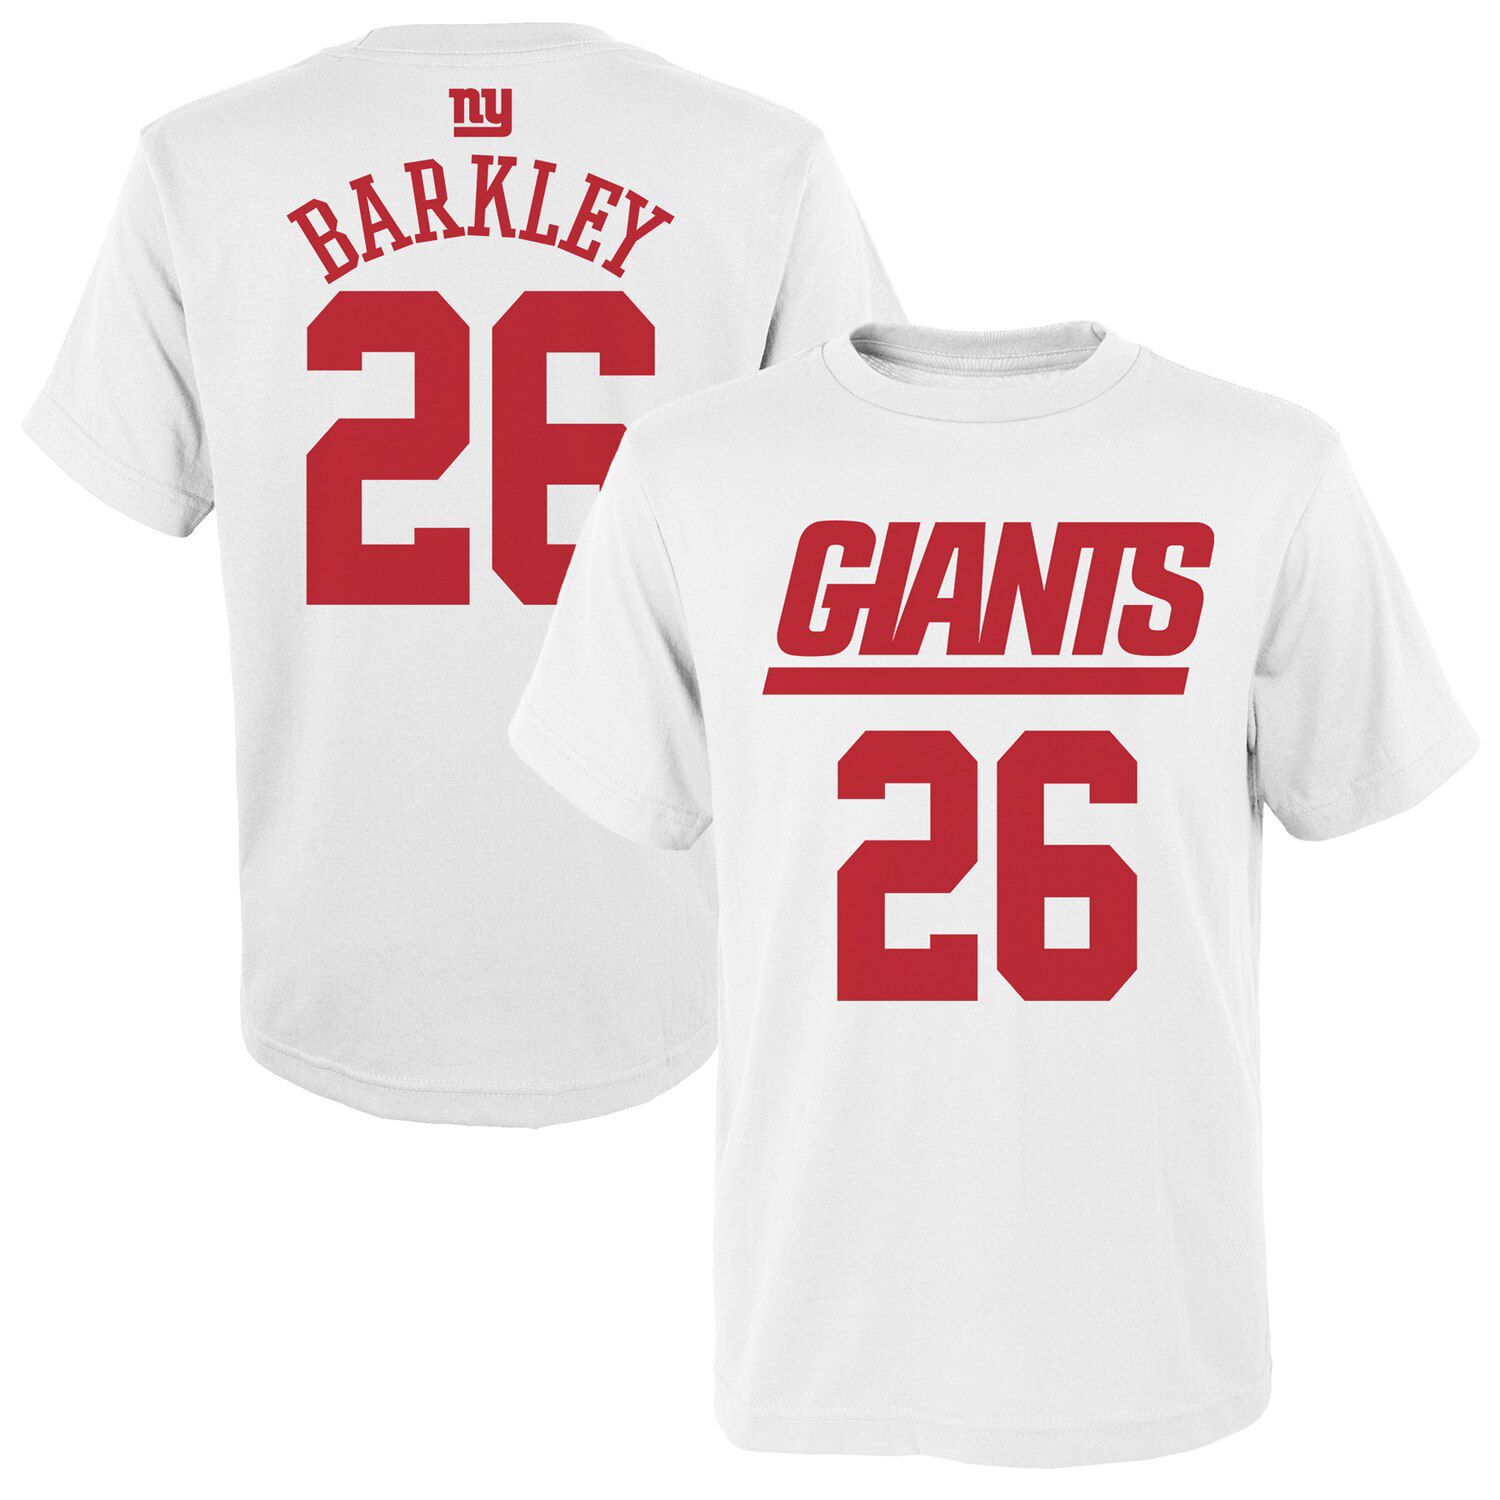 giants no name jersey